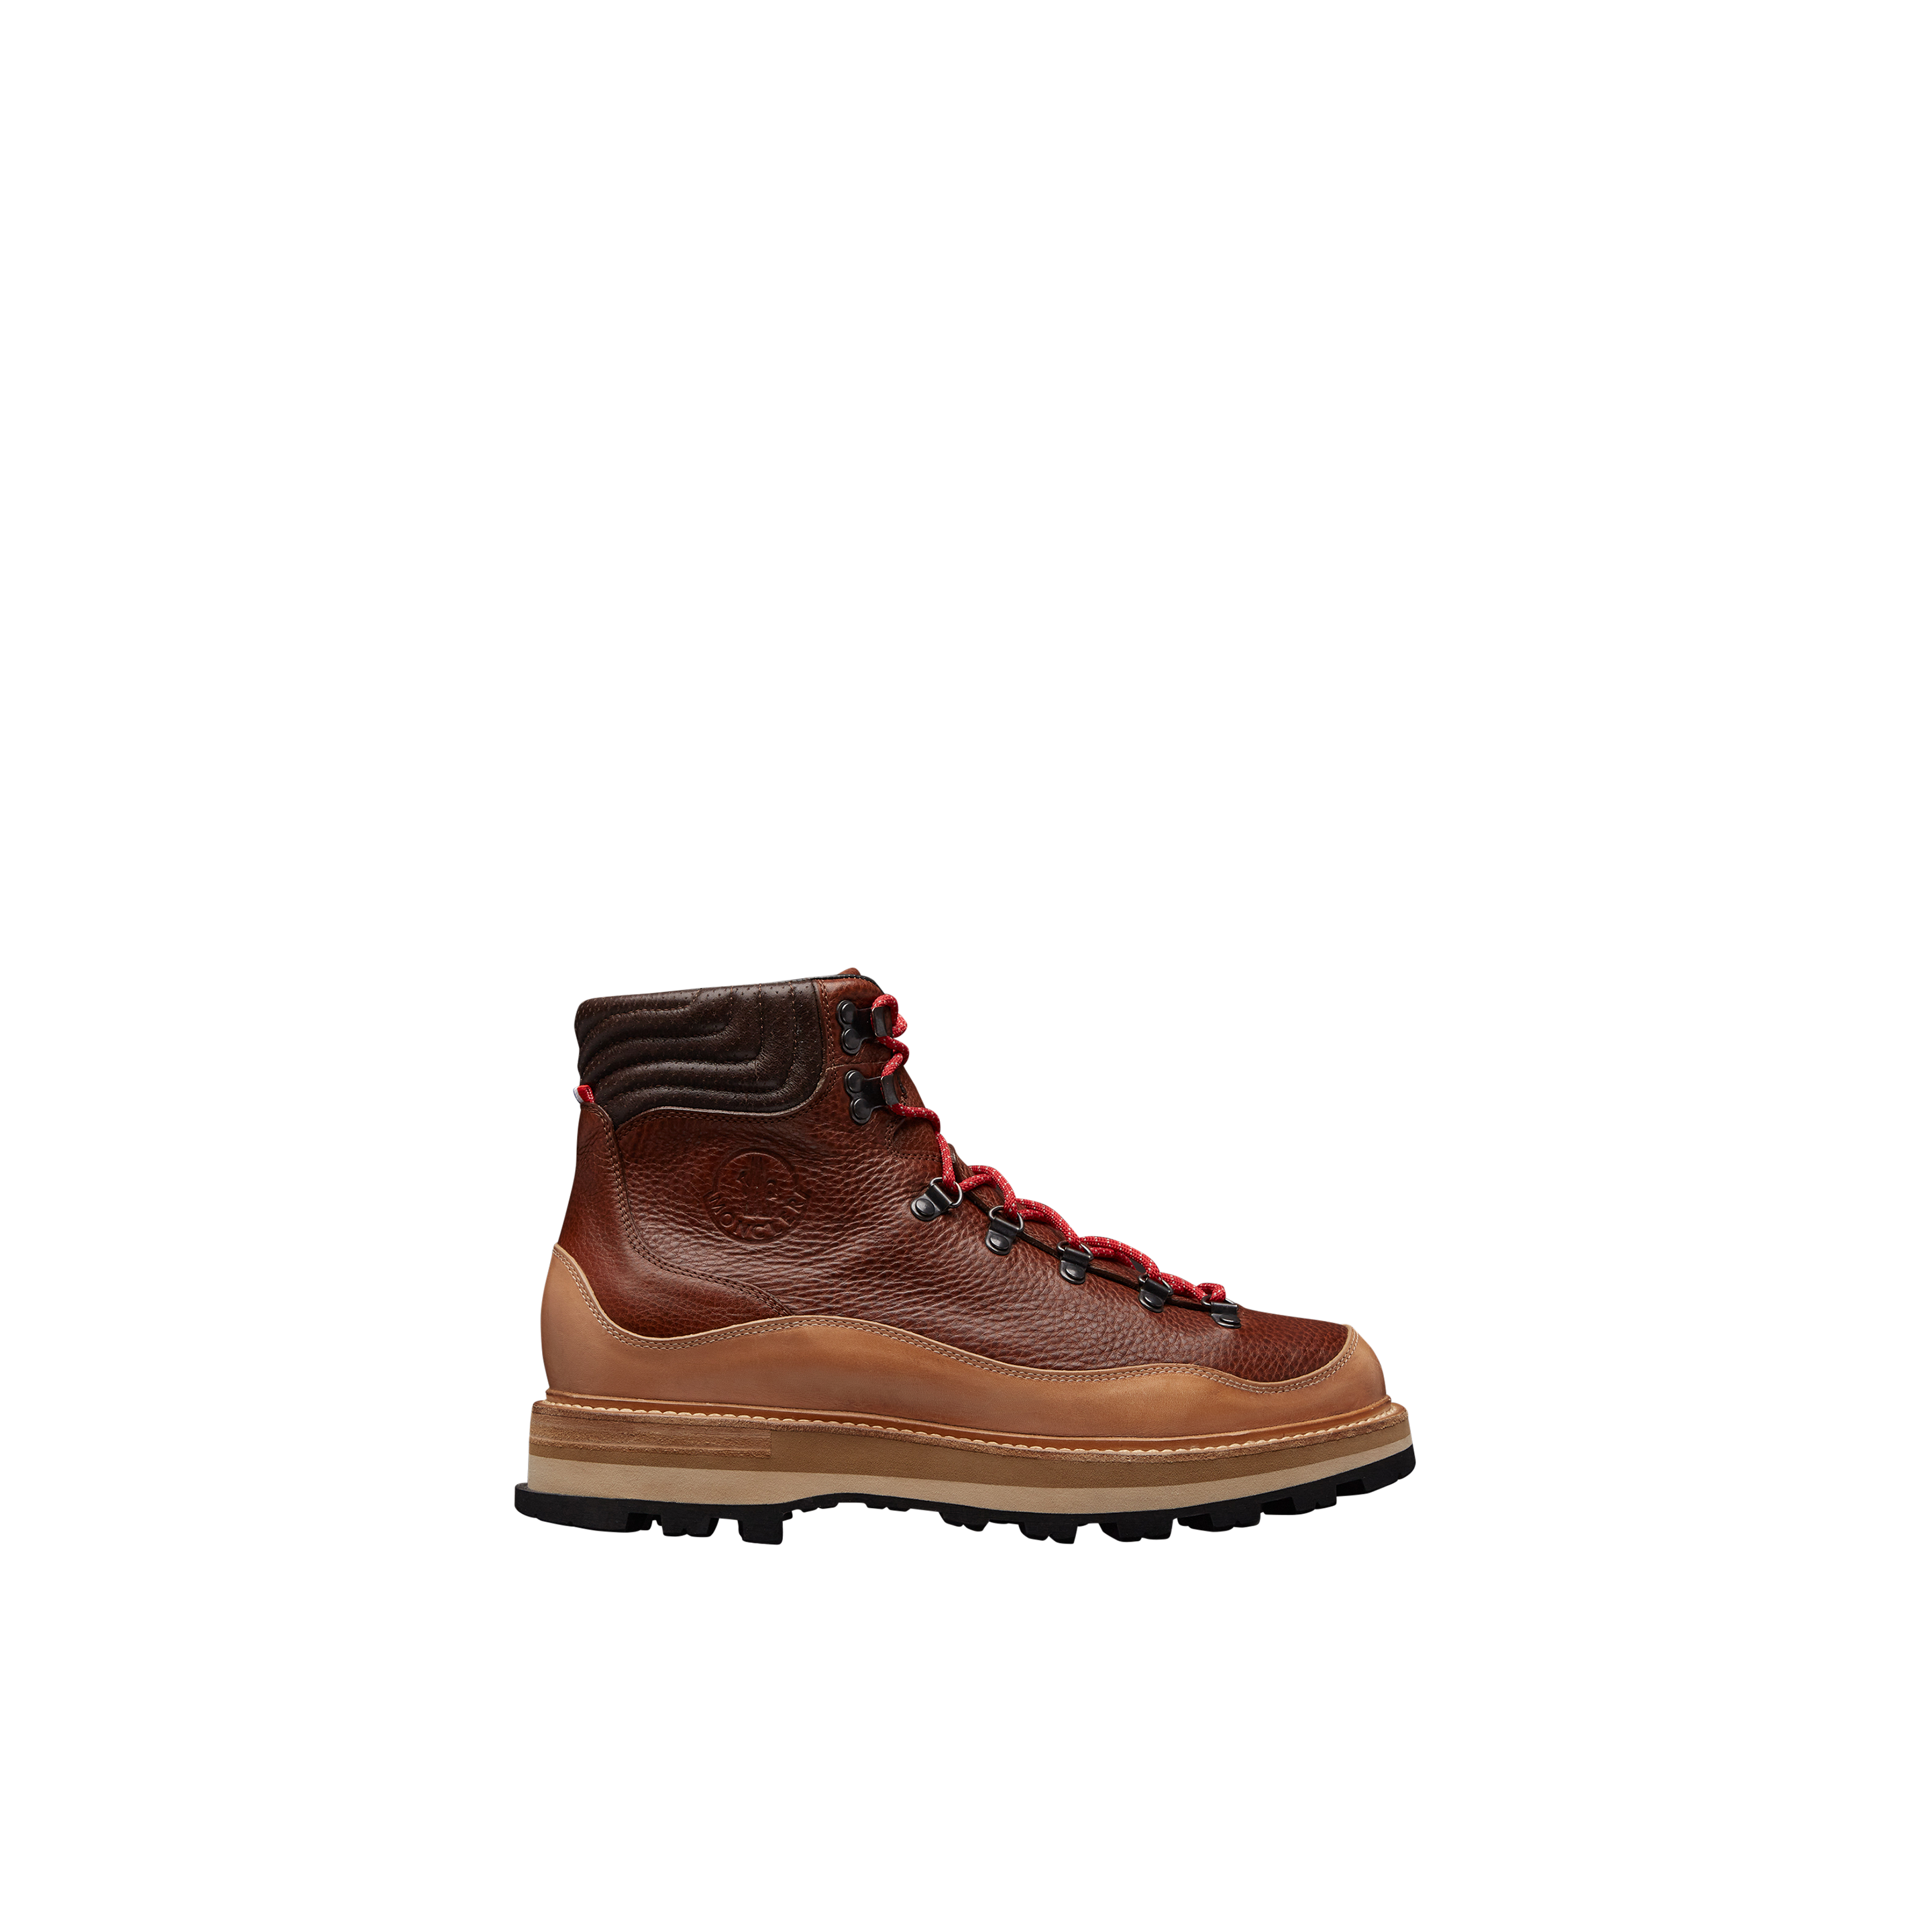 Moncler Collection Peka Trek Hiking Boots Multicolour In Multicolore